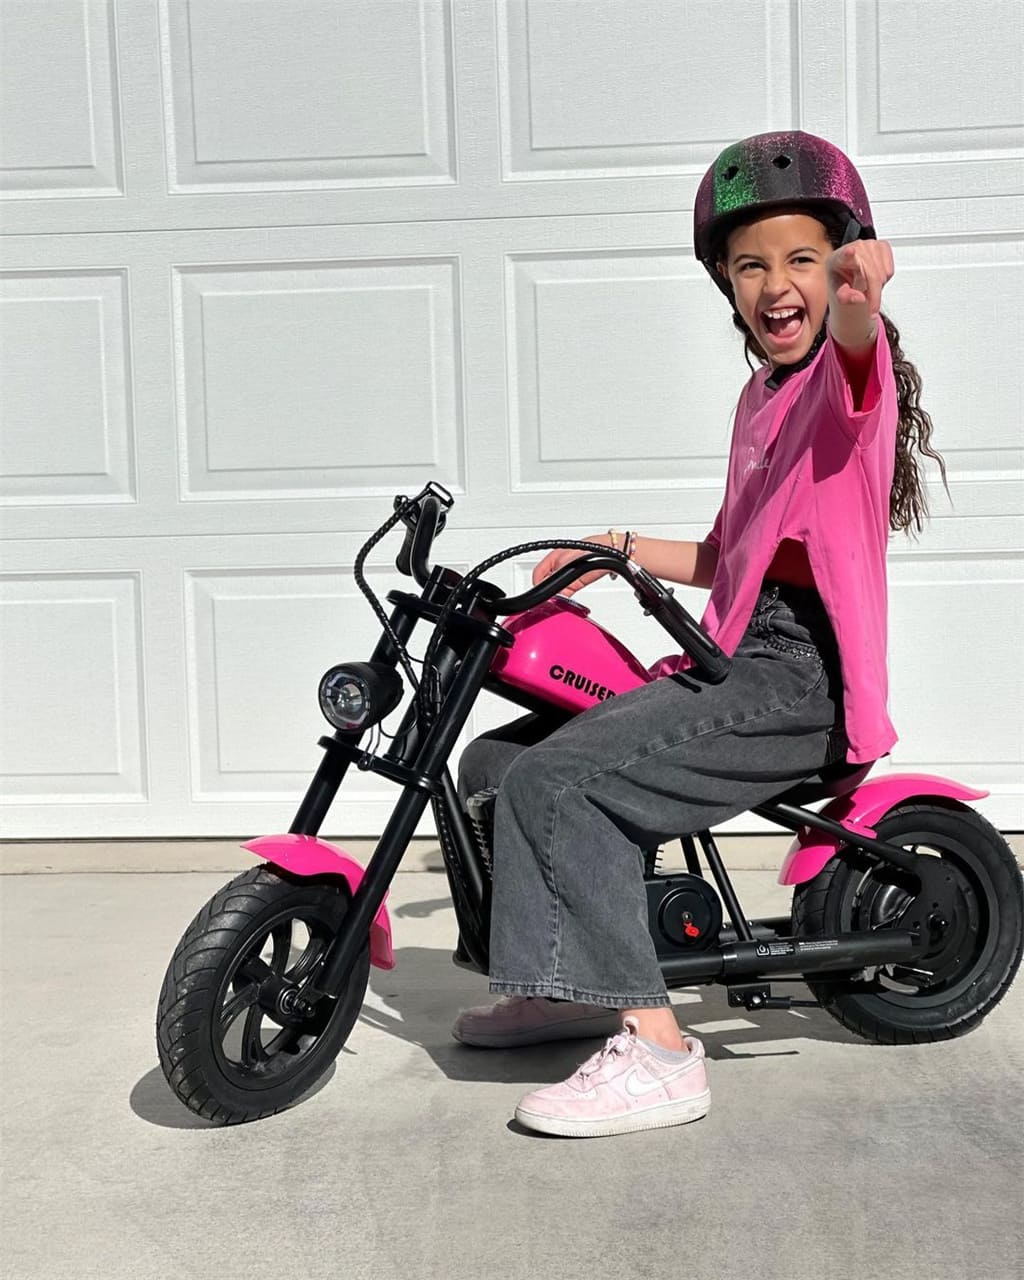 Moped with training wheels for young motorcycle enthusiasts